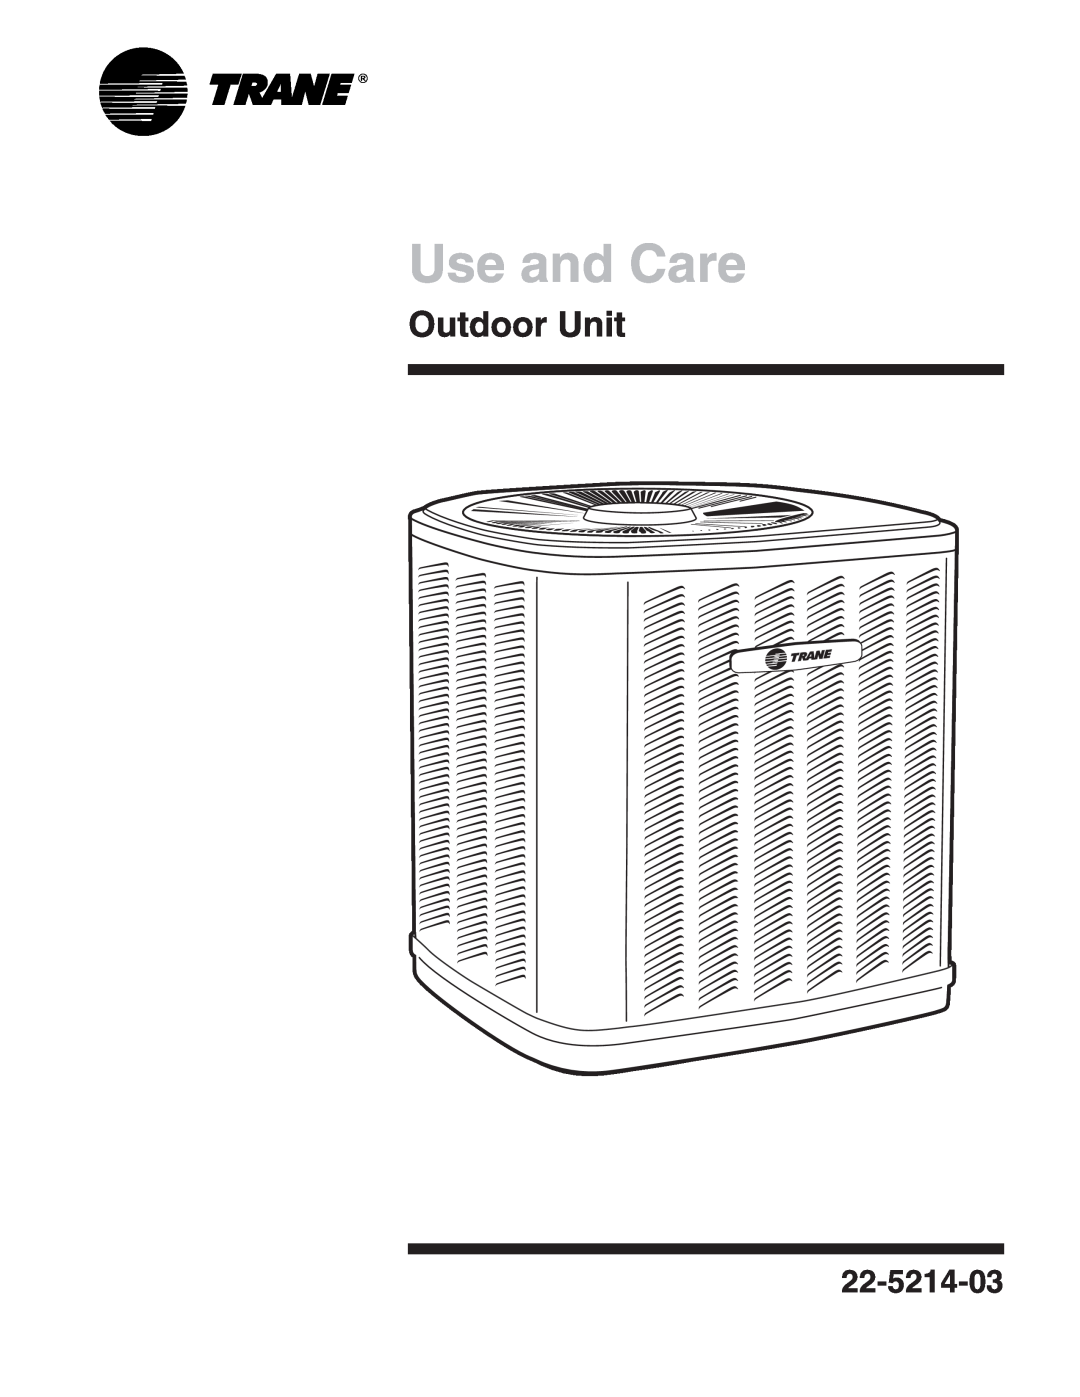 Trane 22-5214-03 manual Outdoor Unit, Use and Care 